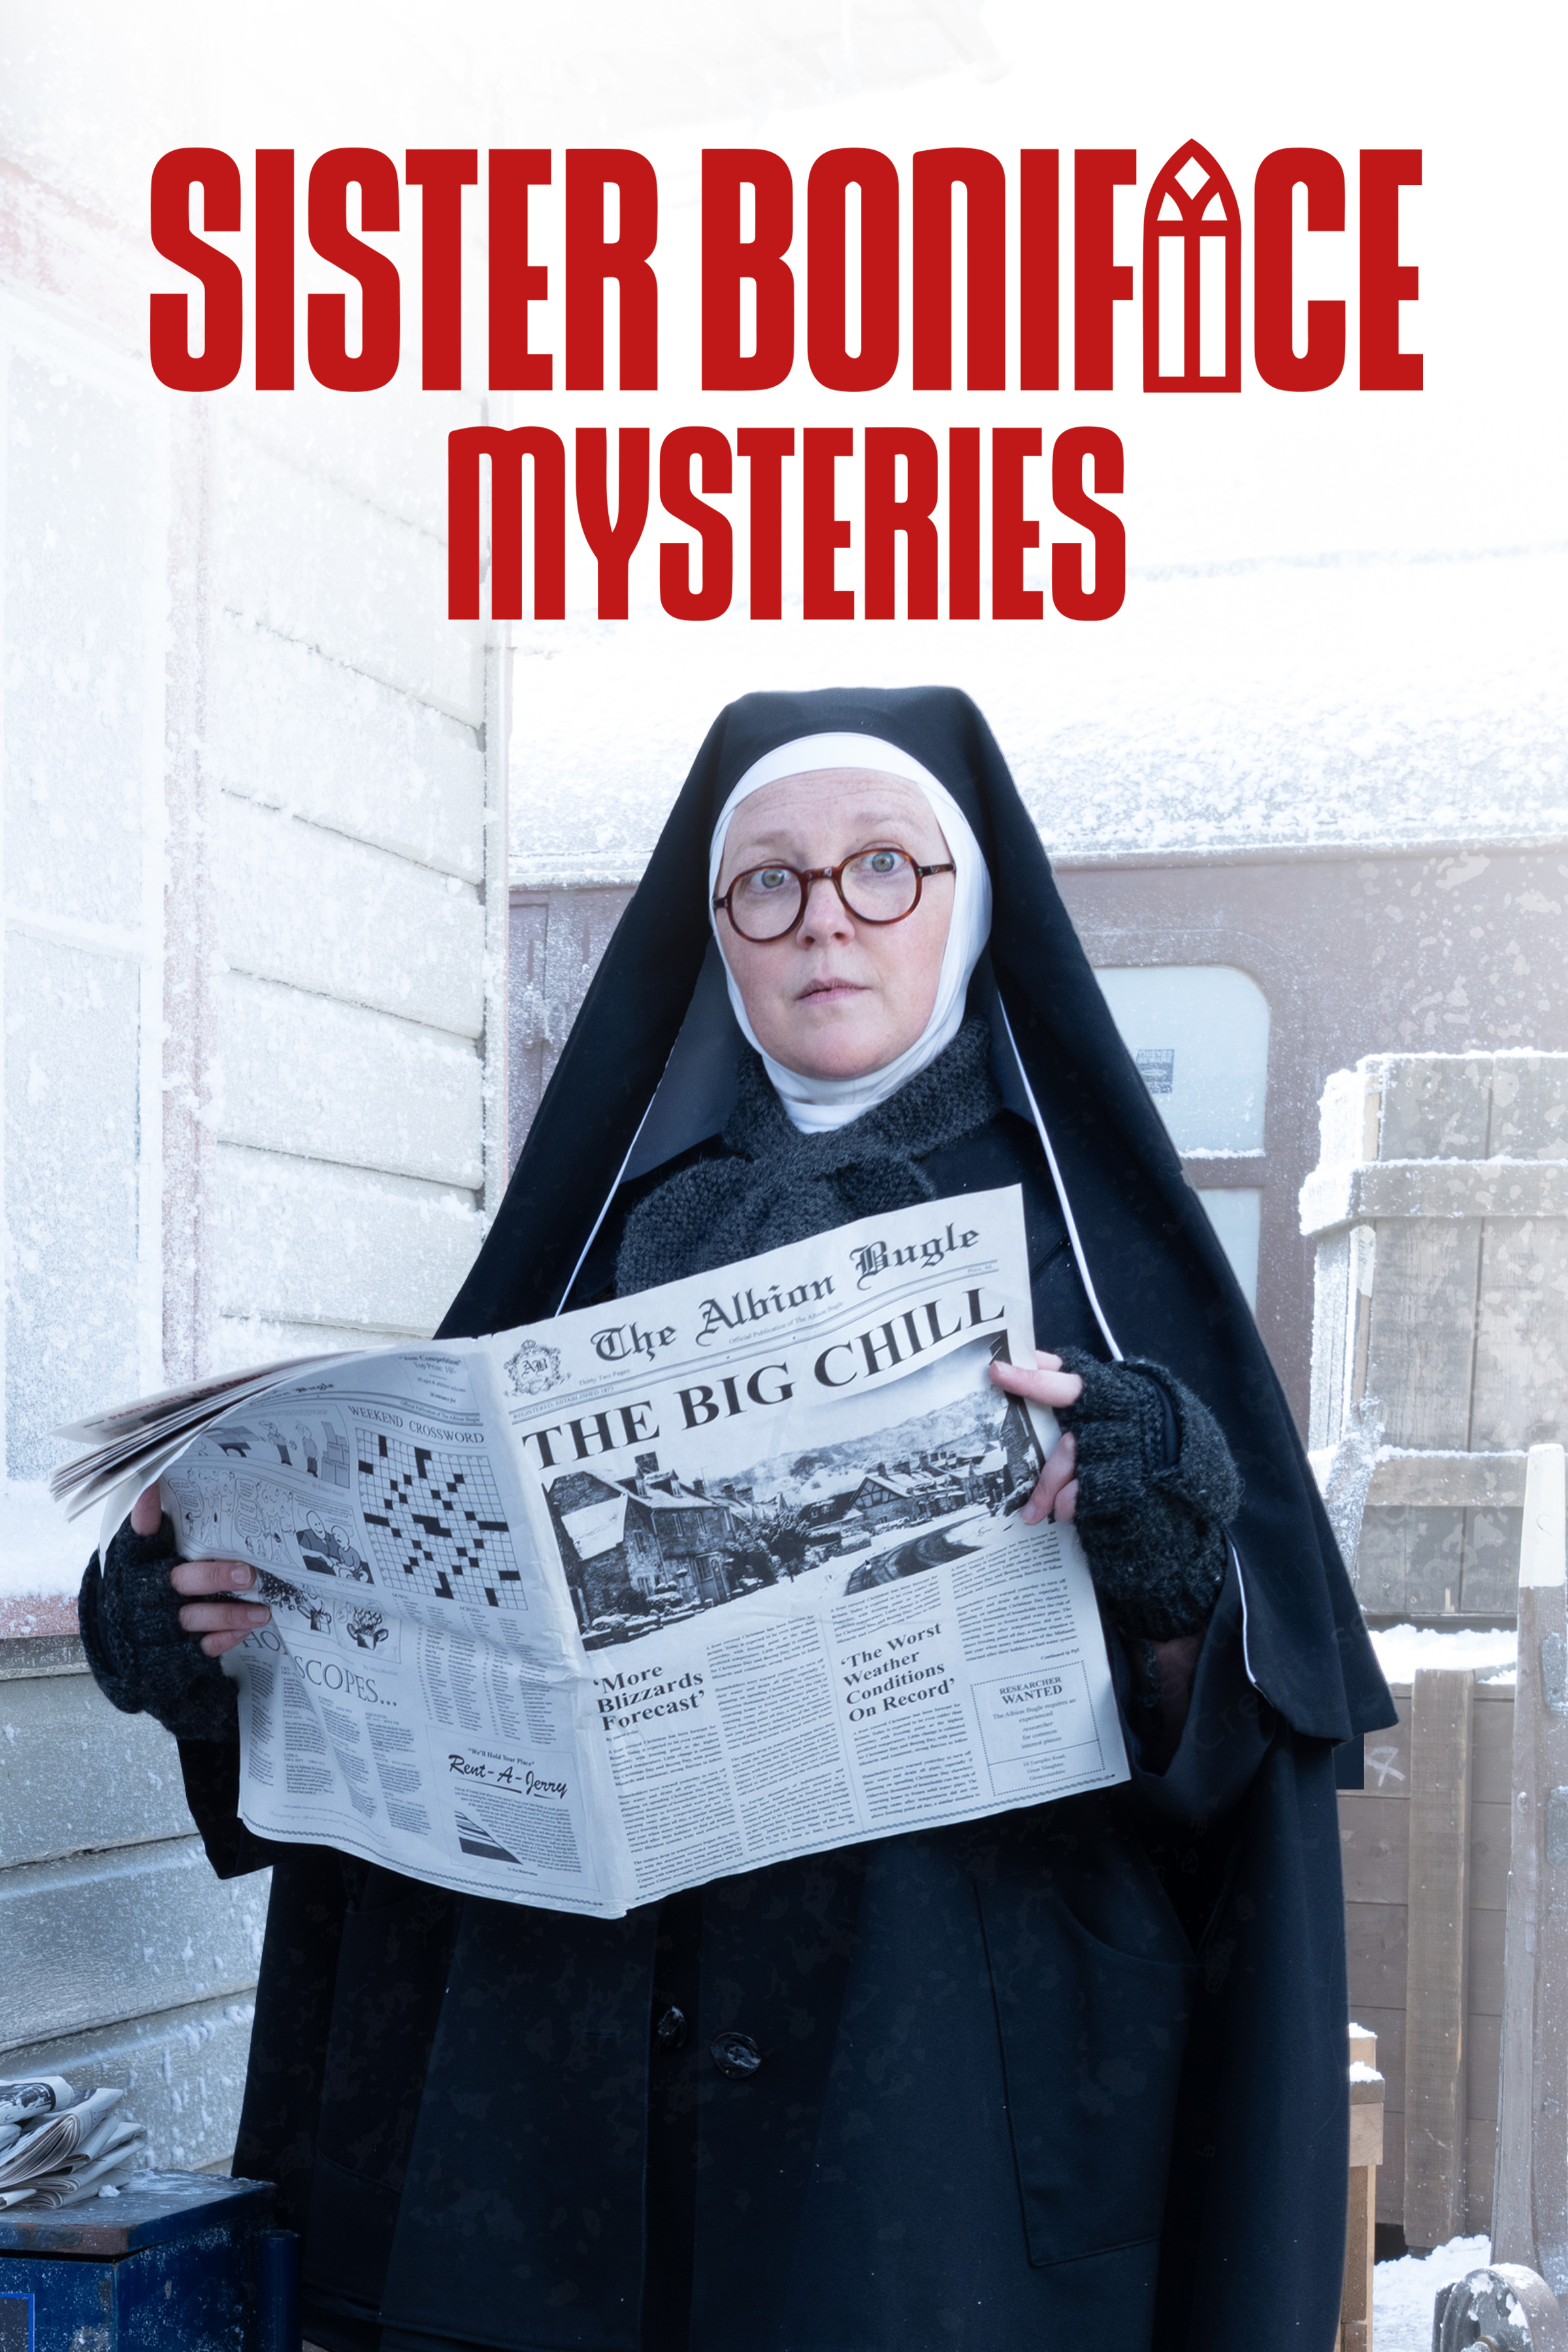 Sister Boniface Mysteries': S02.E06. “A Tight Squeeze”